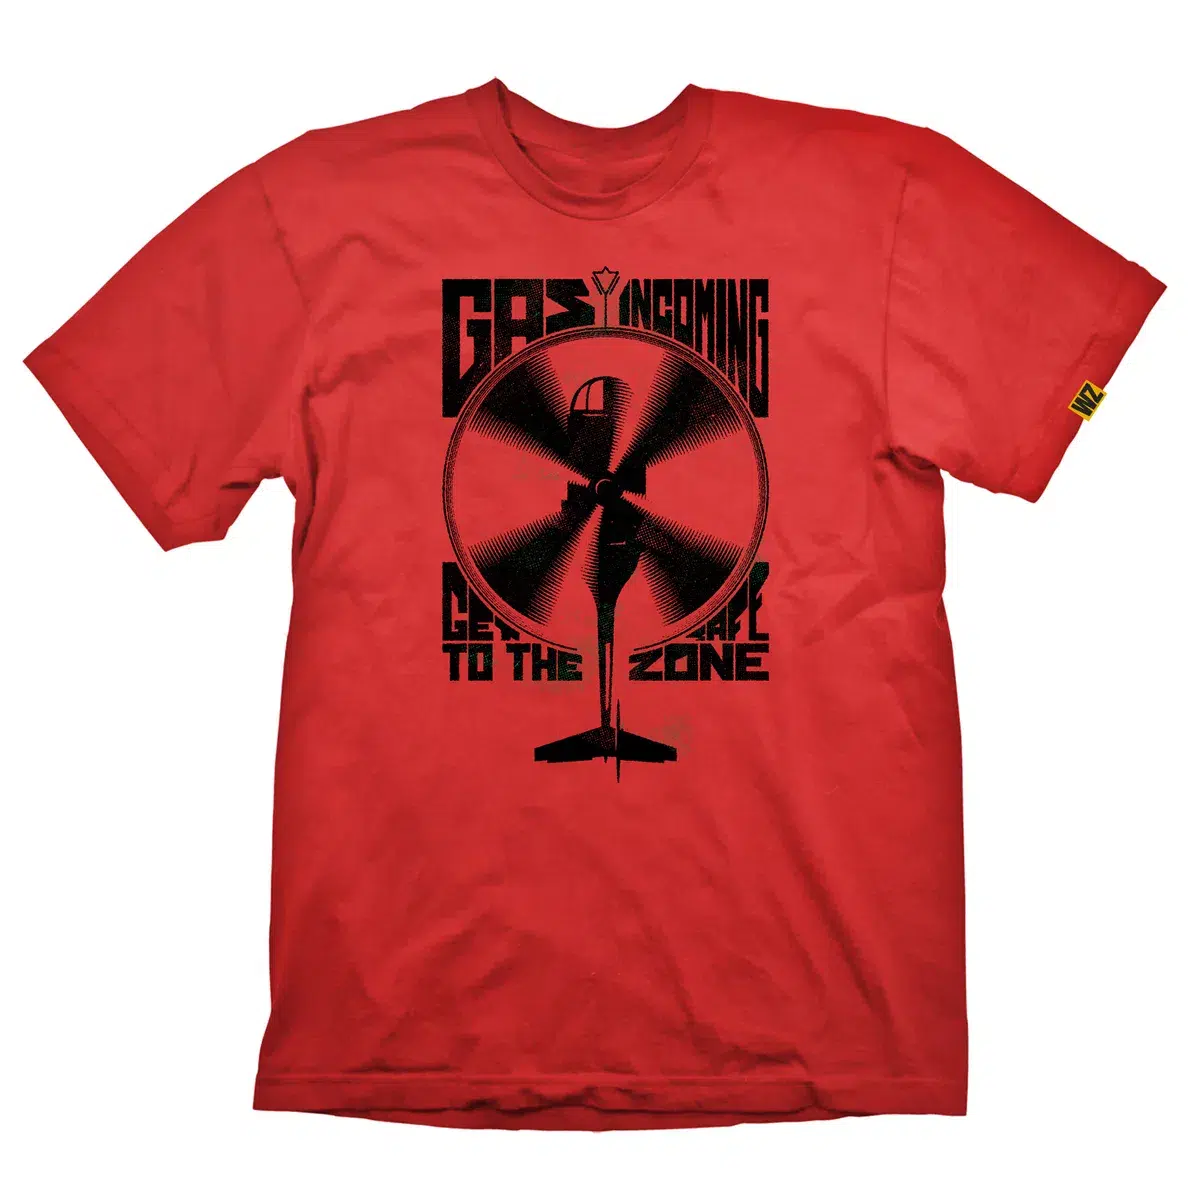 Call of Duty: Warzone T-Shirt "Gas Incoming" Red S